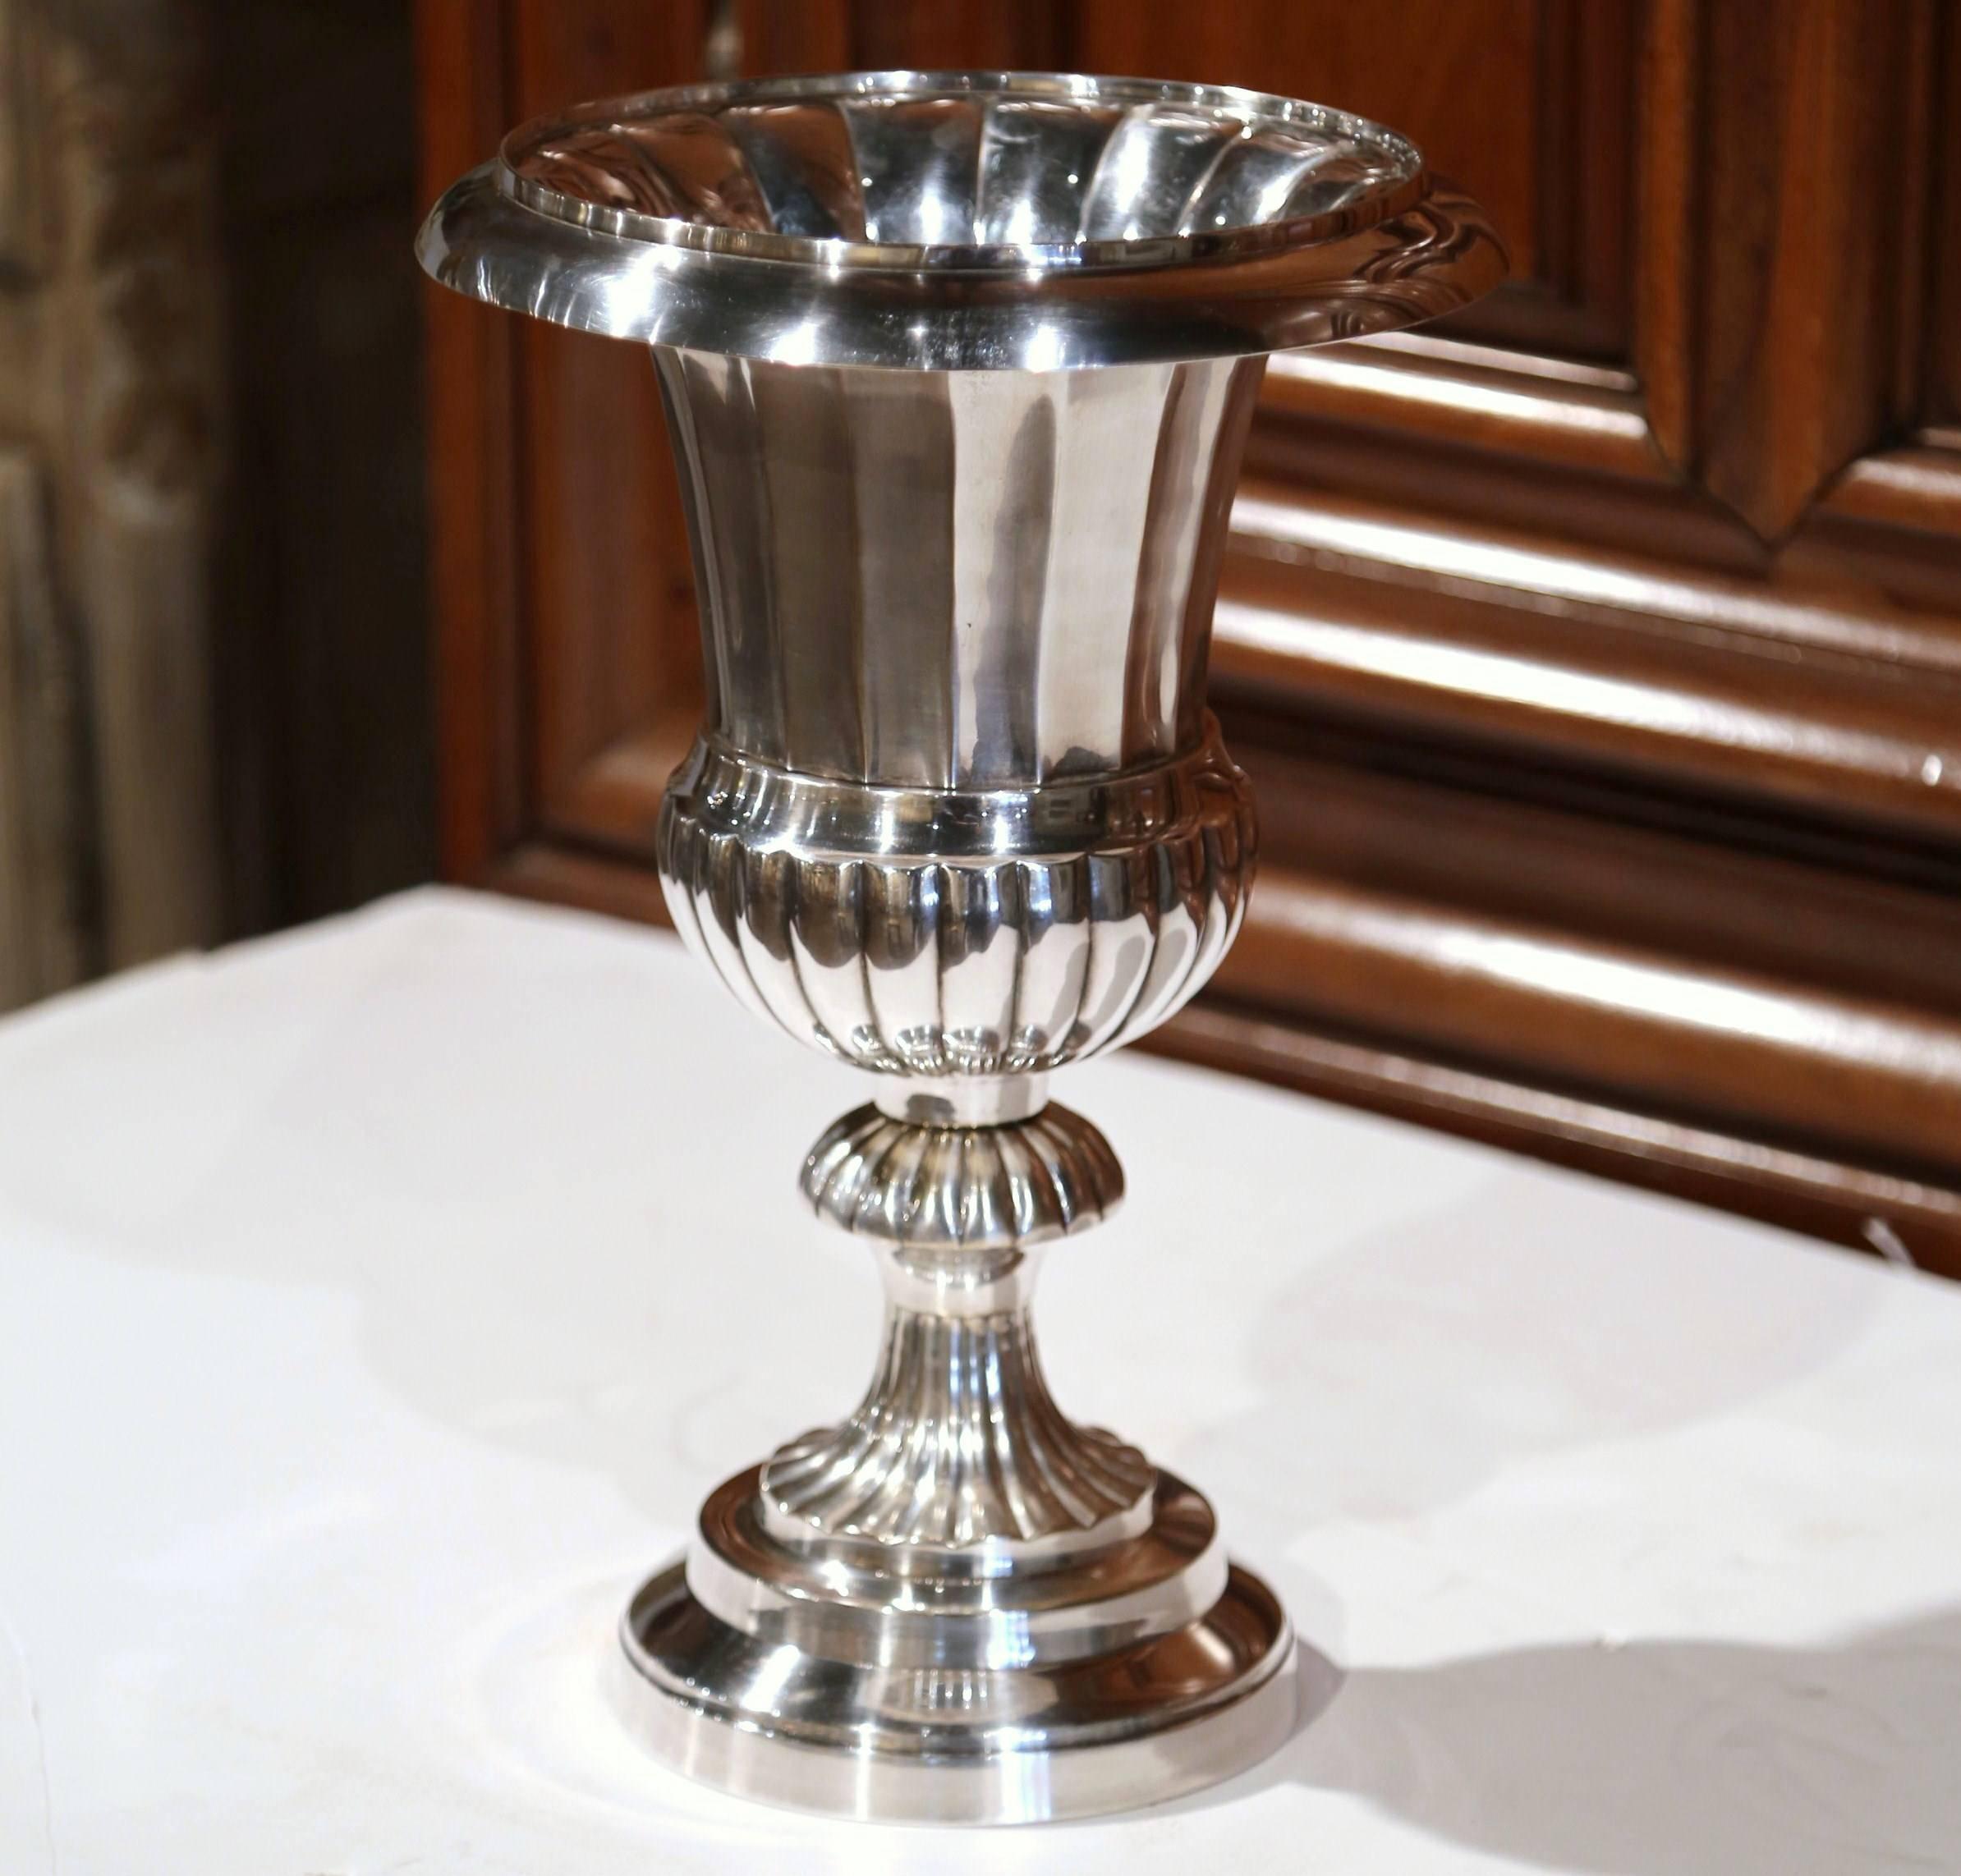 This tall and heavy antique wine cooler was crafted in England, circa 1920. The elegant champagne bucket is shaped like a classical vase, and features a beautiful silver plated finish throughout. On the base of the bucket, the markings read ESMC 22